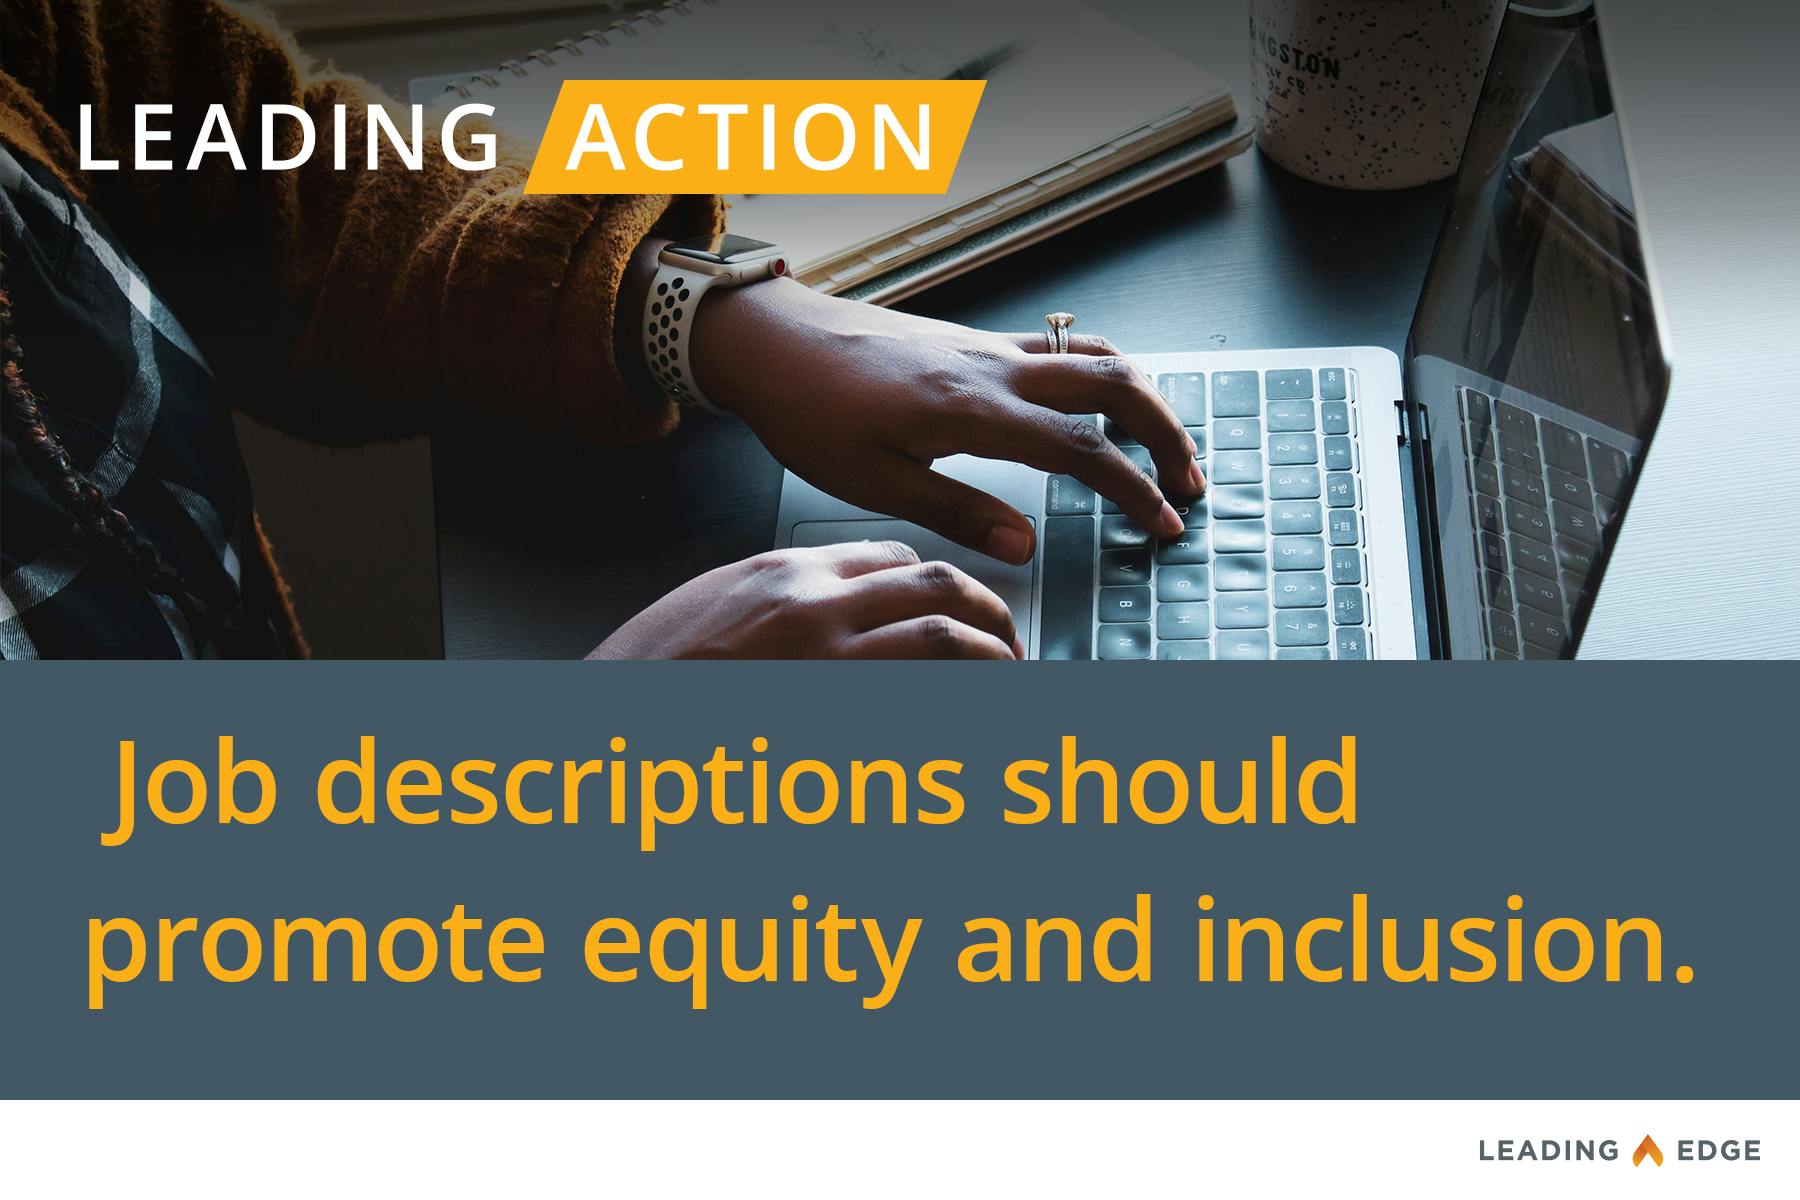 Leading Action: Job descriptions should promote equity and inclusion.